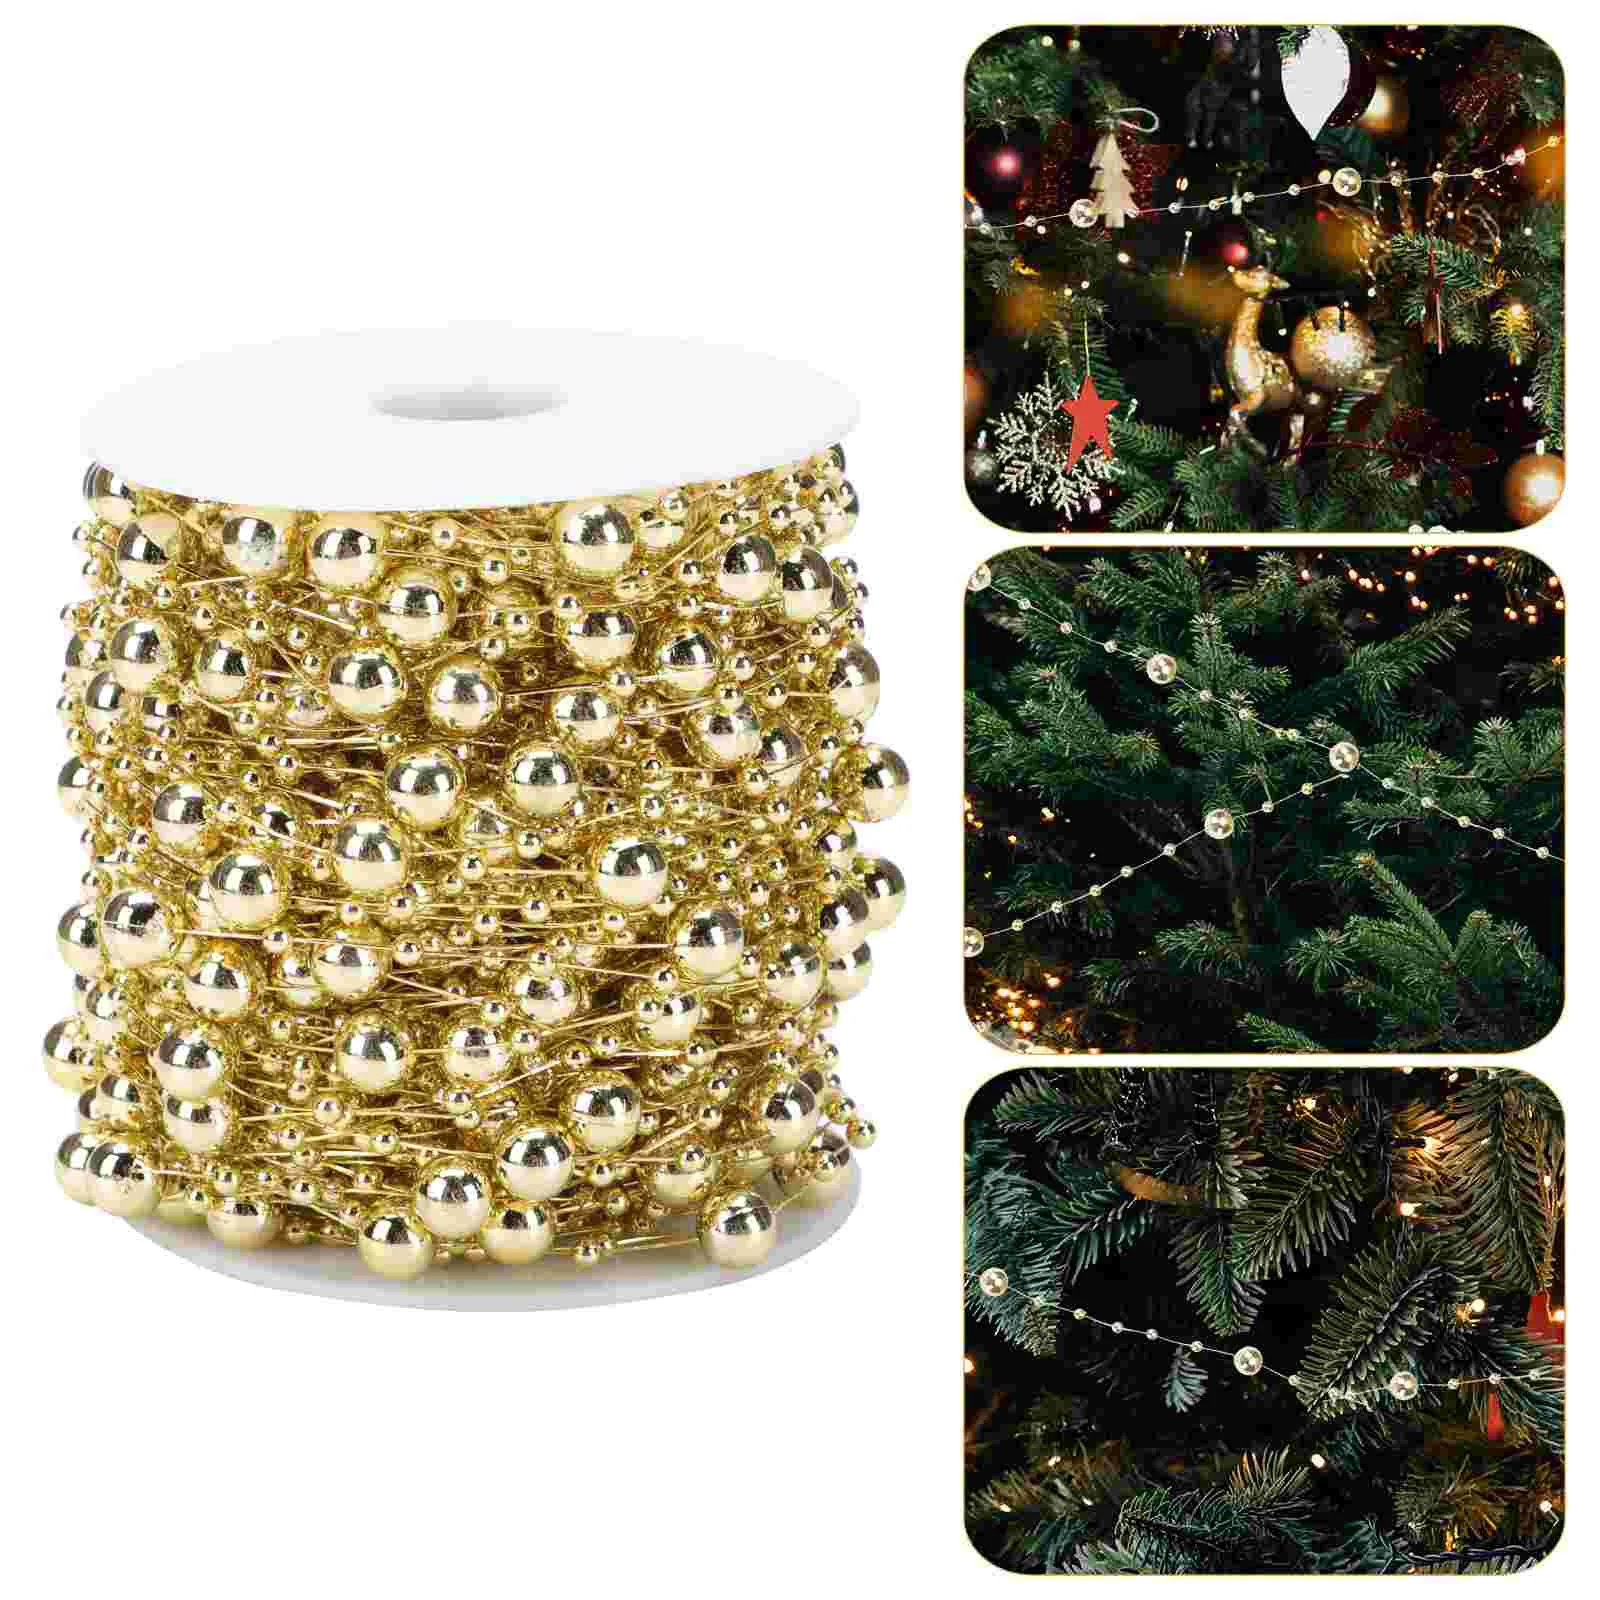 

Christmas Tree Beaded Garland Pearl Strands Chain Artificial Pearls Beads Trim Garland for Xmas Tree Holiday Wedding DIY